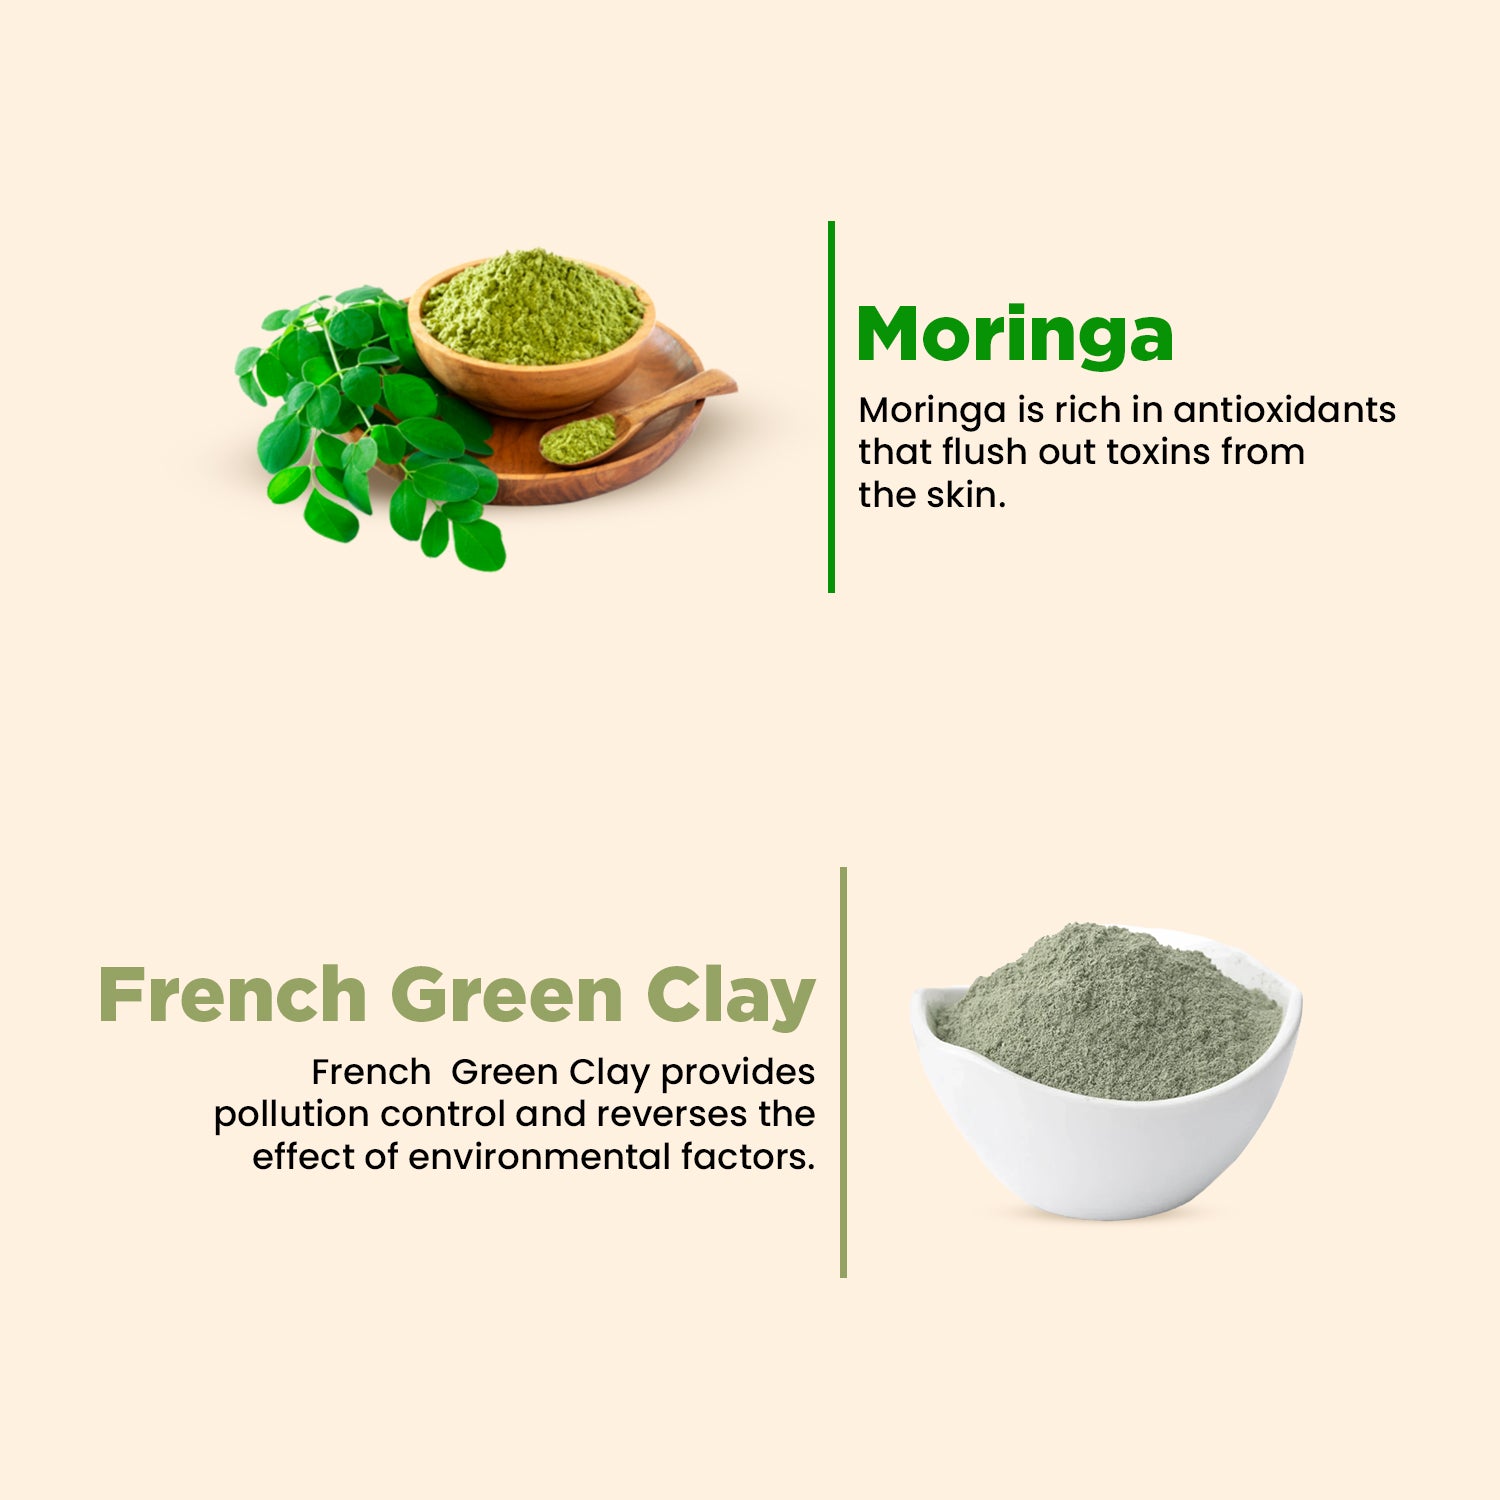 Purifying Face Pack | Clear Skin | Anti Ageing | Normal to Oily Skin | Moringa &amp; Vitamin E | 100g